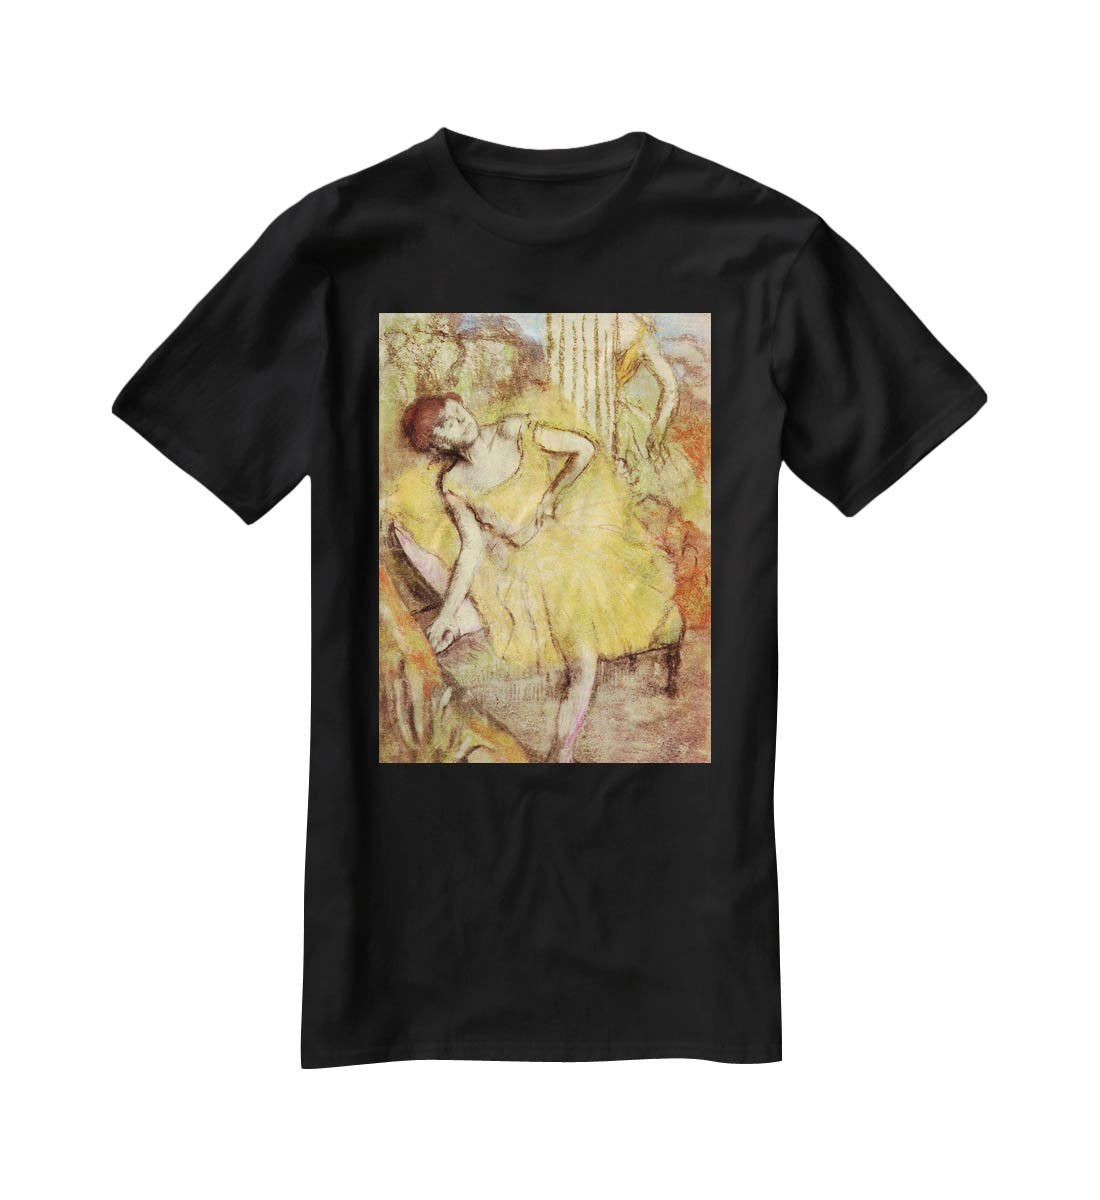 Sitting dancer with the right leg up by Degas T-Shirt - Canvas Art Rocks - 1